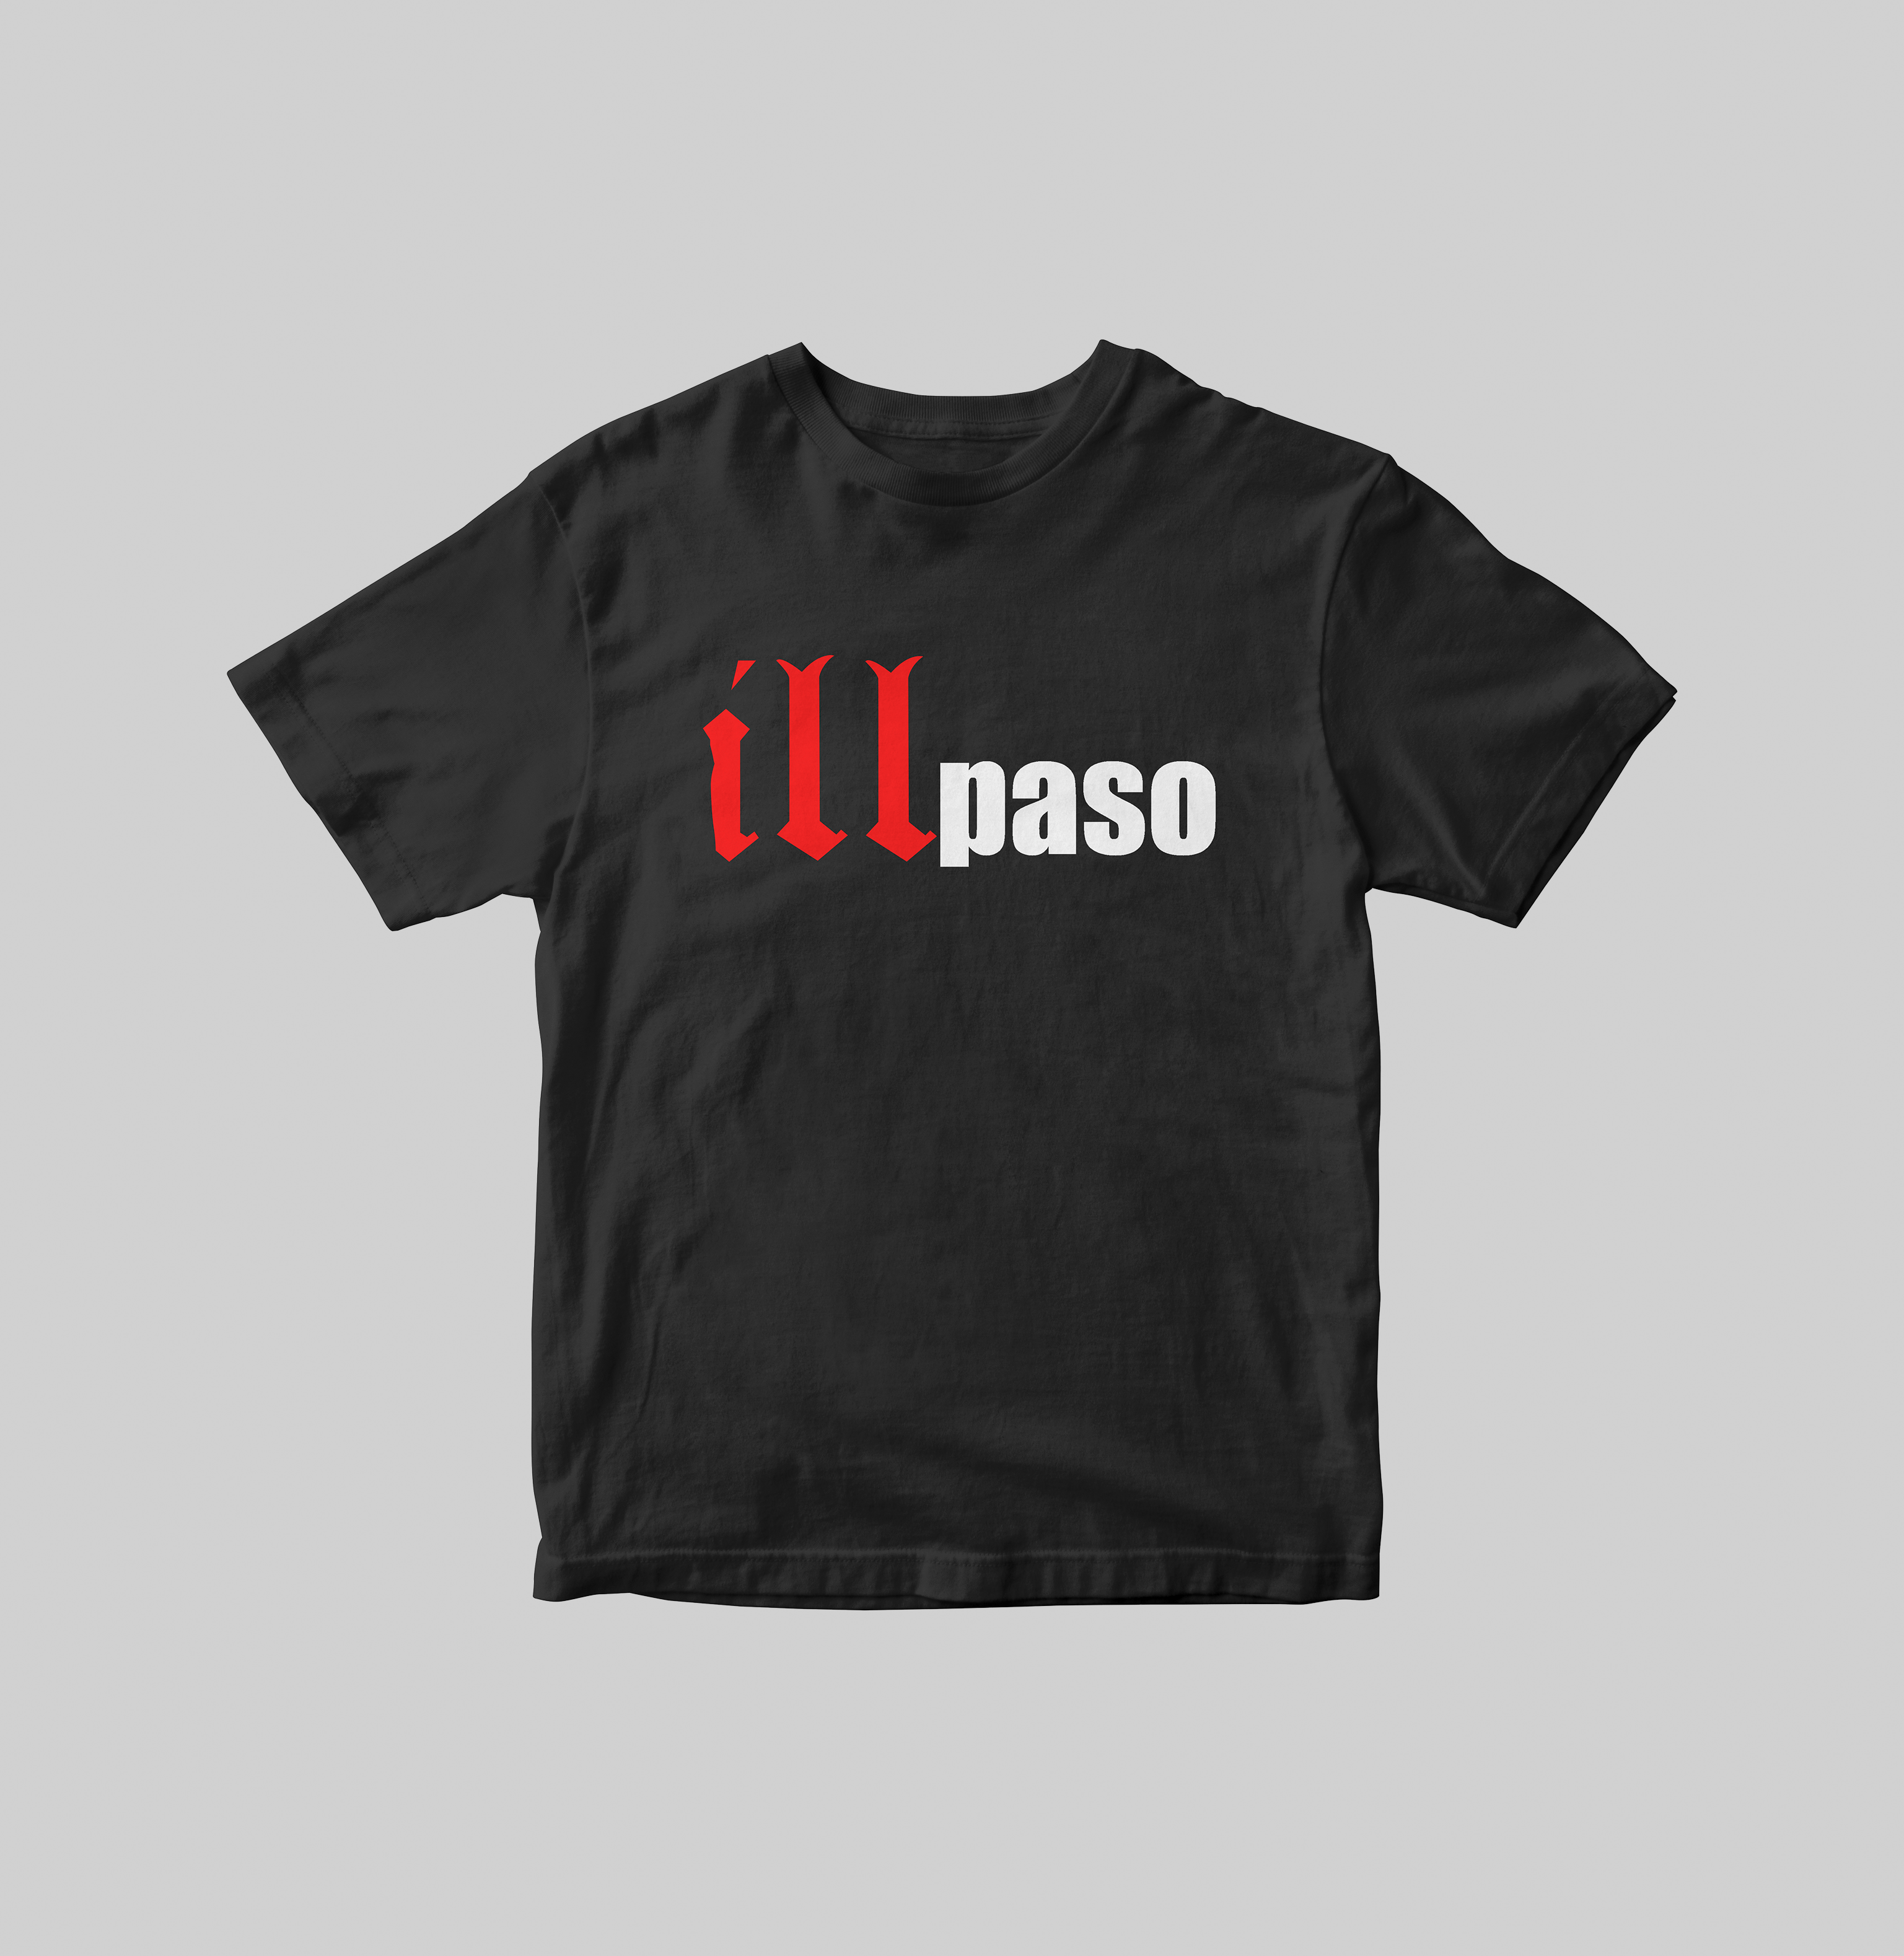 "illmatic Tribute" Youth T-shirt (Black) by illpaso